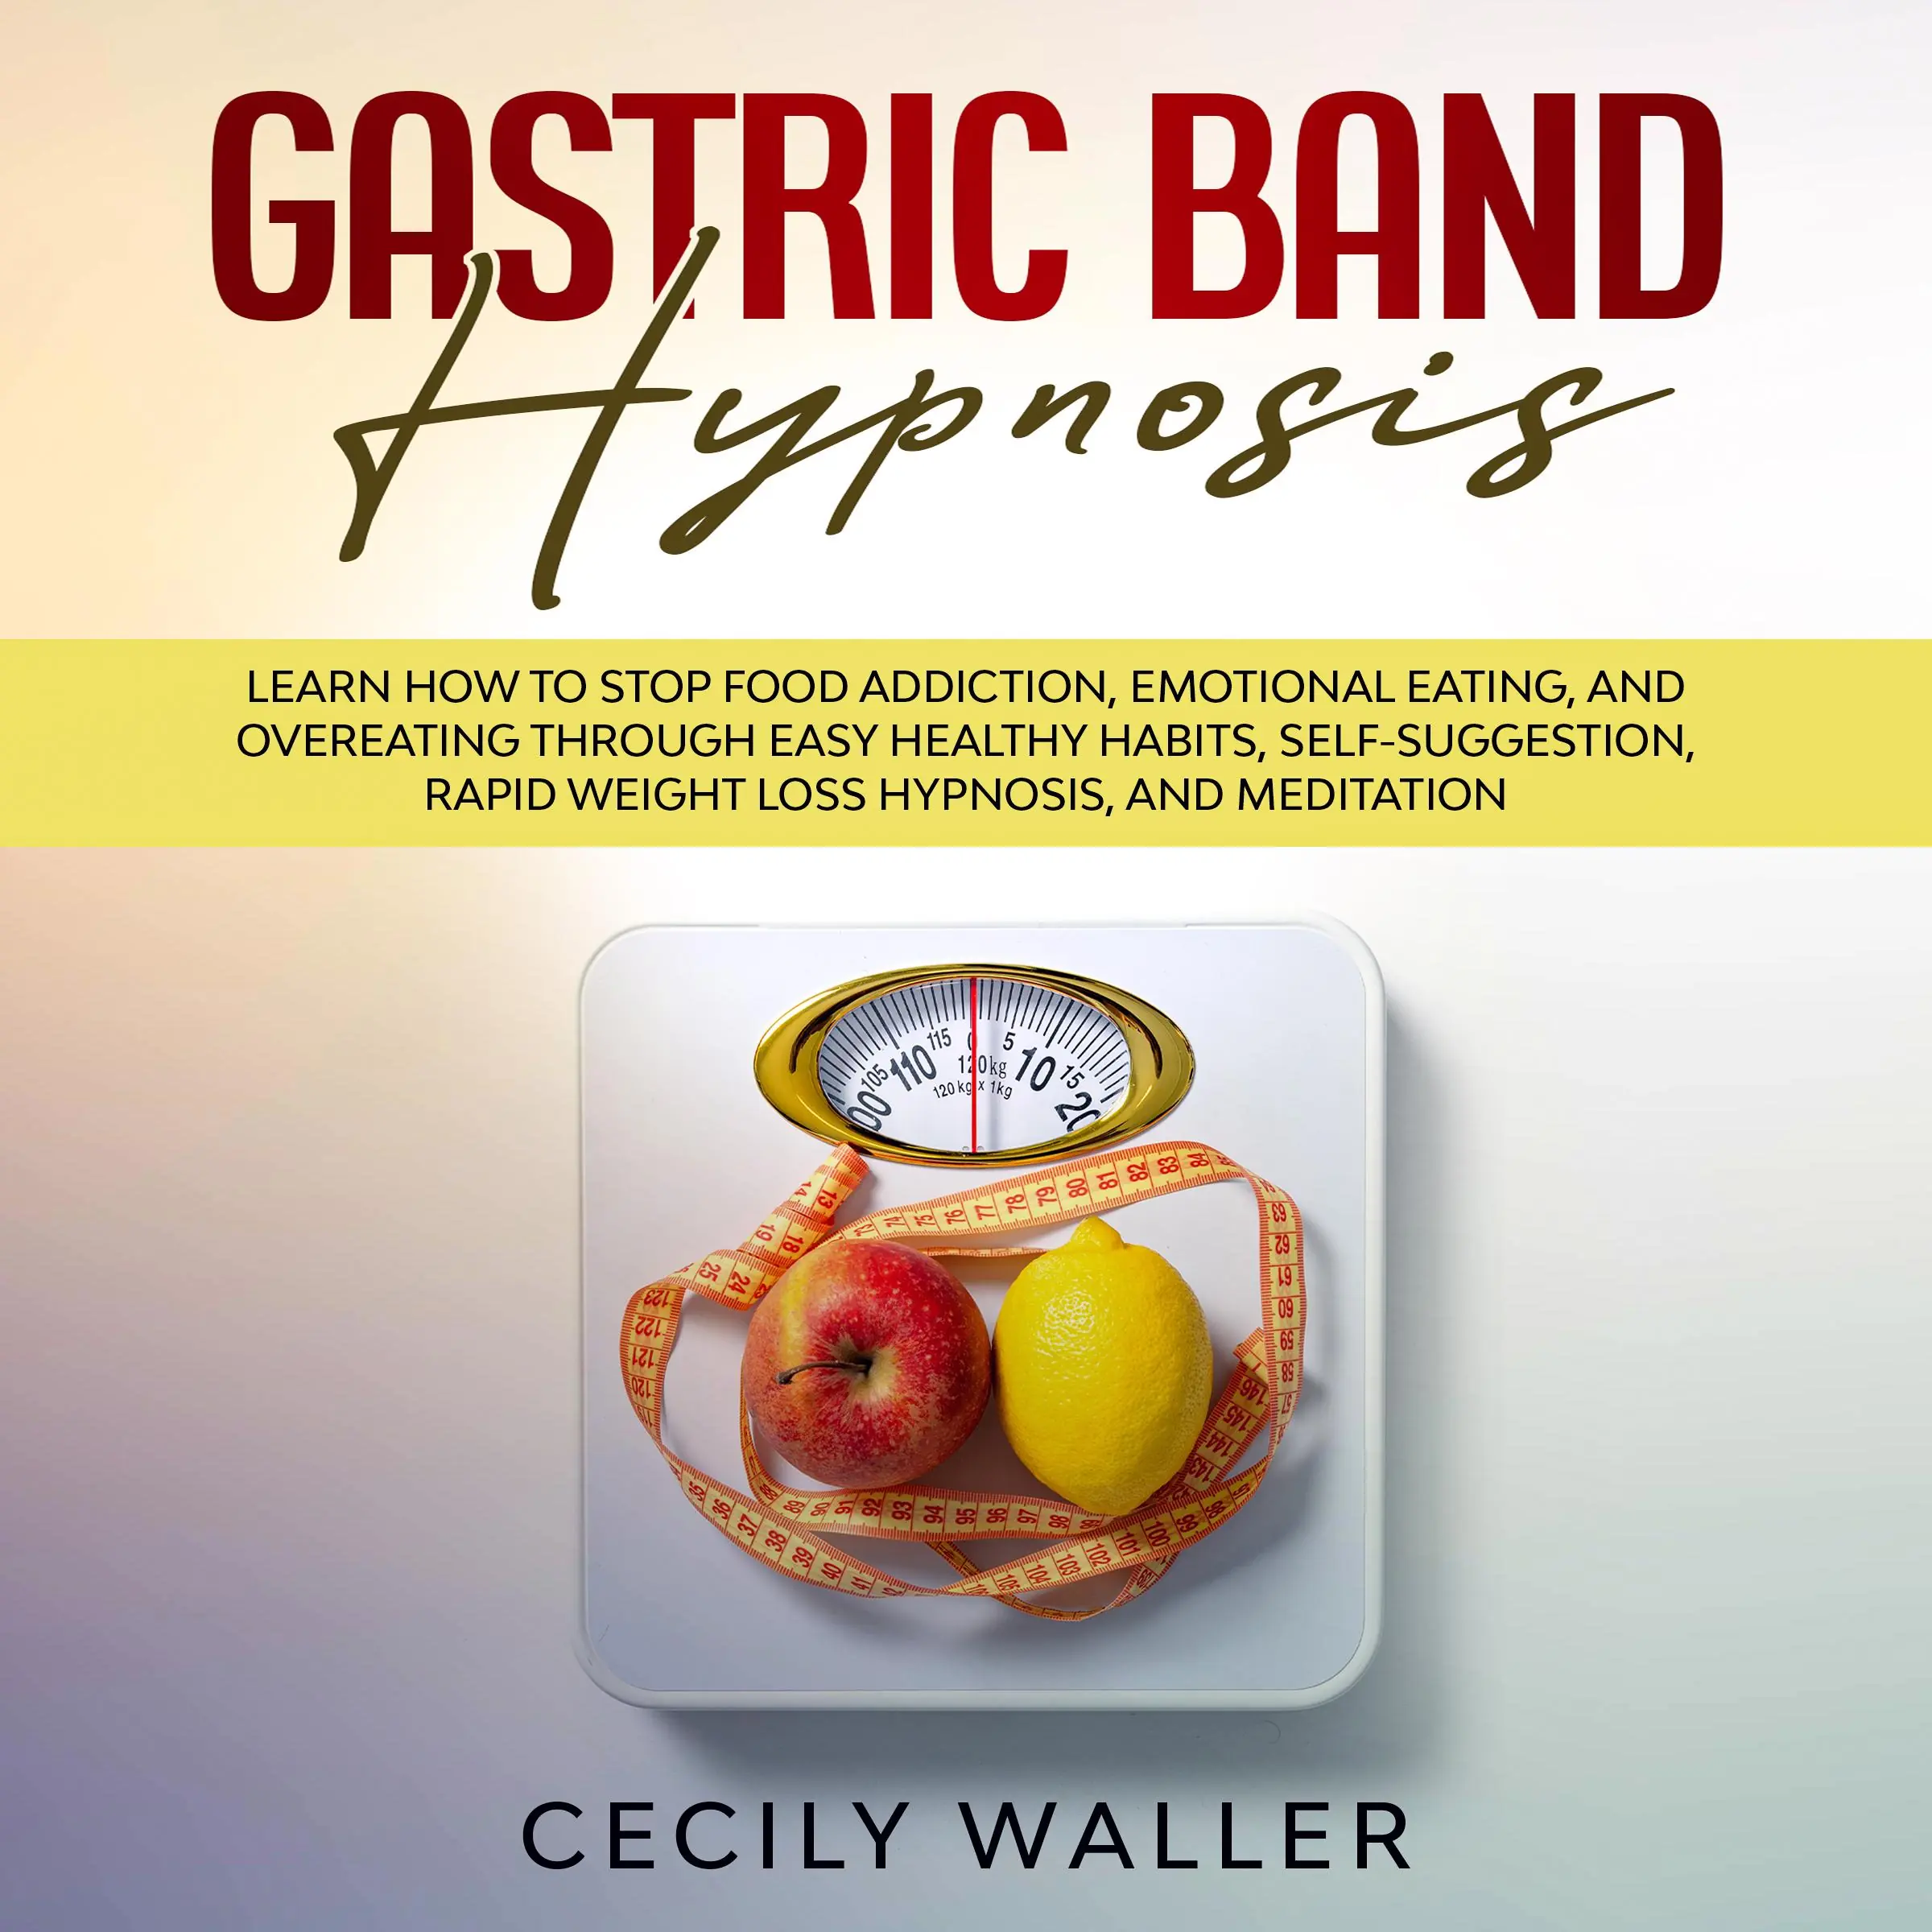 Gastric Band Hypnosis Audiobook by Cecily Waller